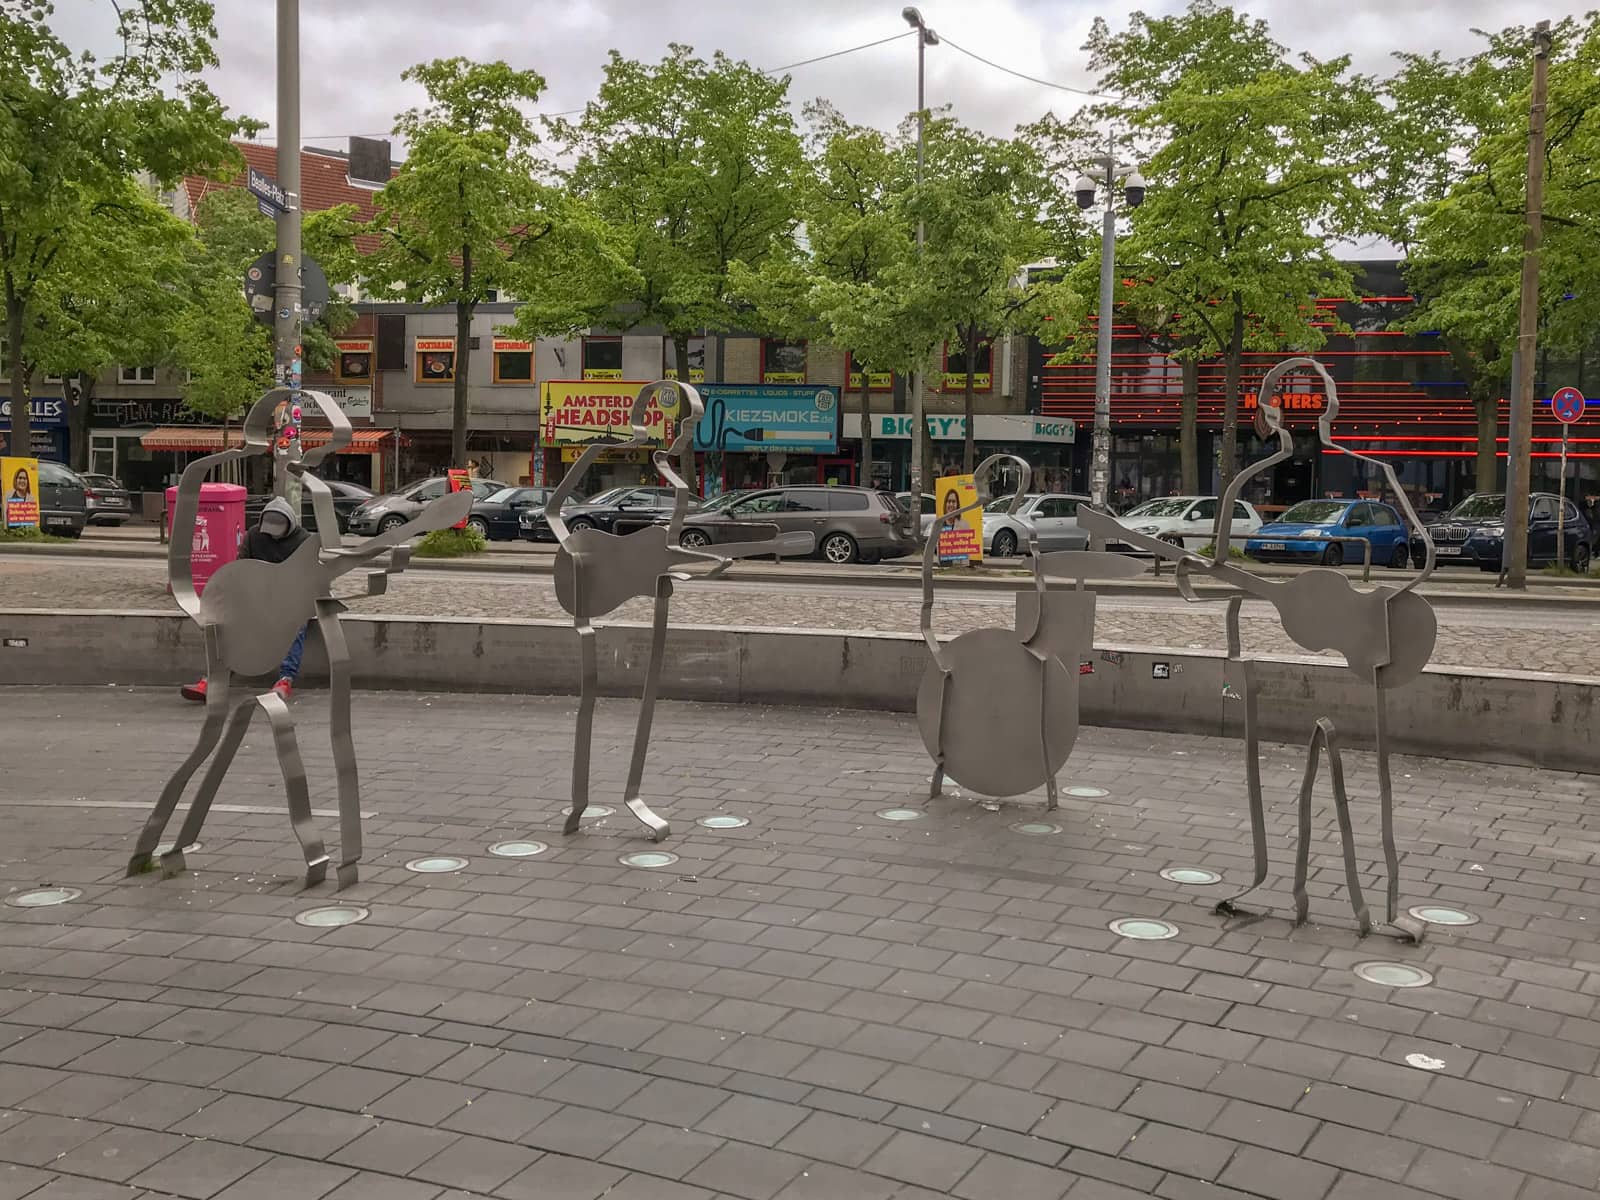 Four outlined metal statue figurines in an open area of tiled concrete